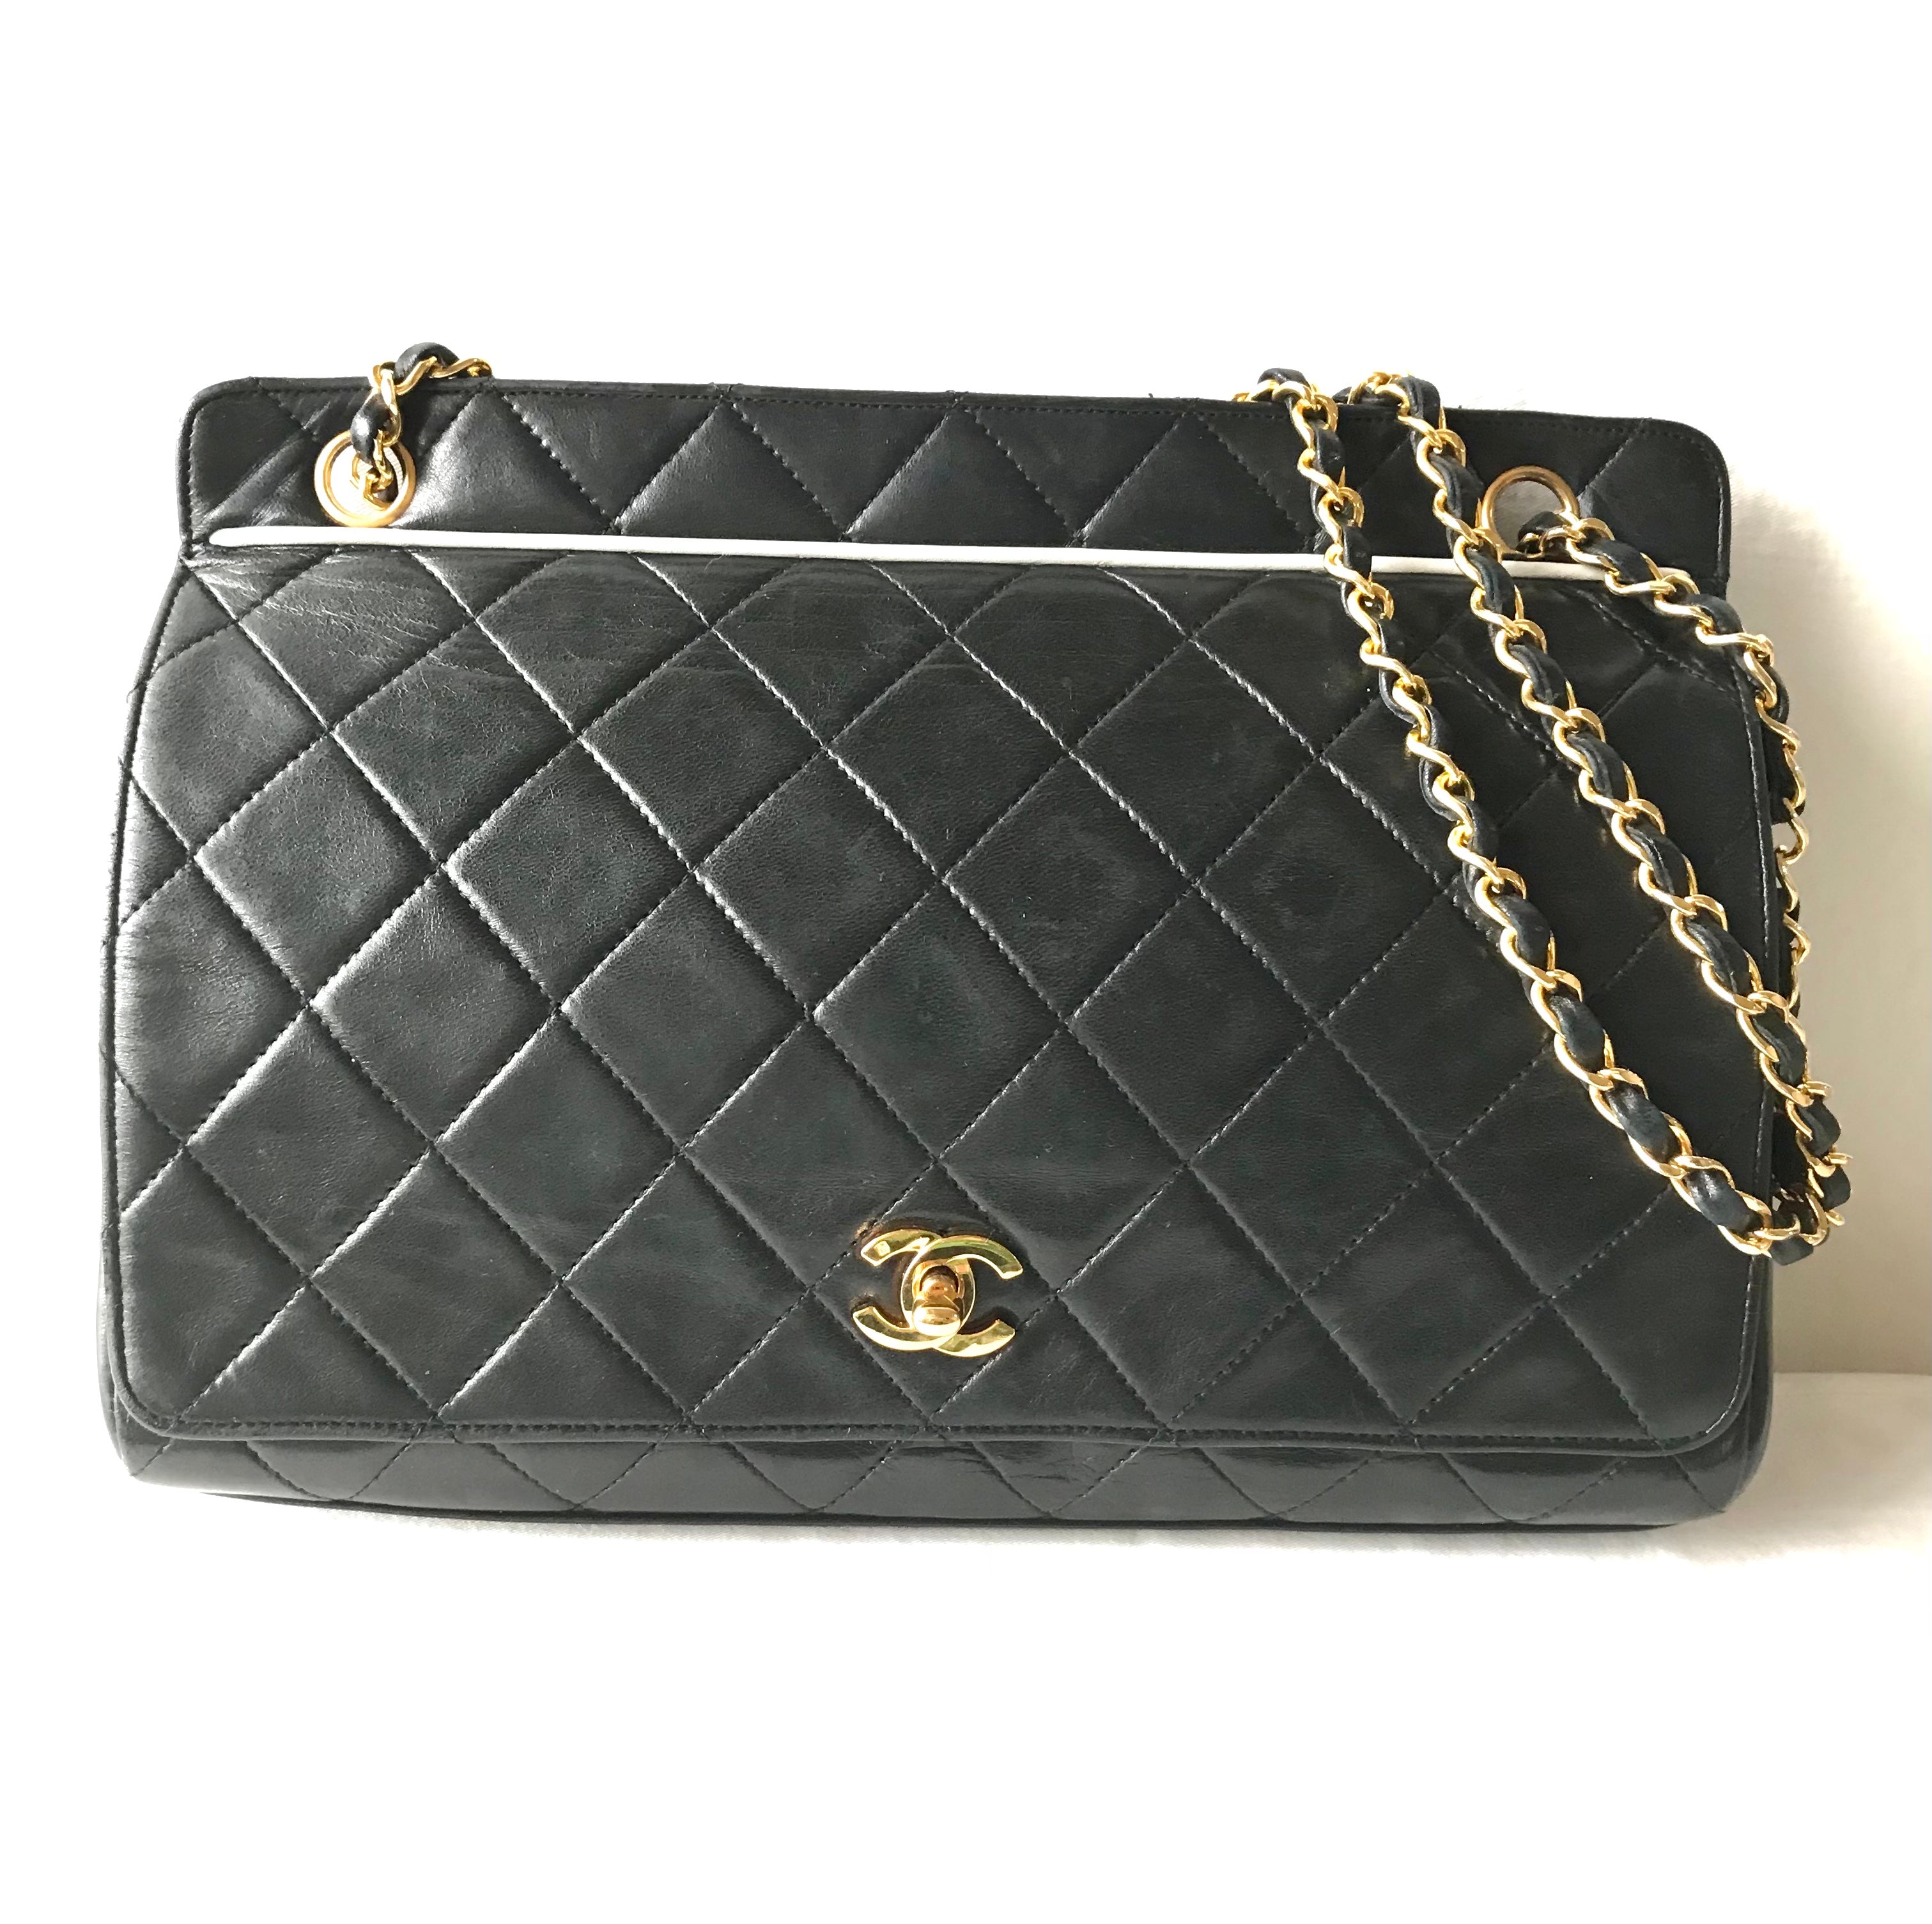 Chanel Limited Edition Rare Paris-Byzance Gold and Black Tweed